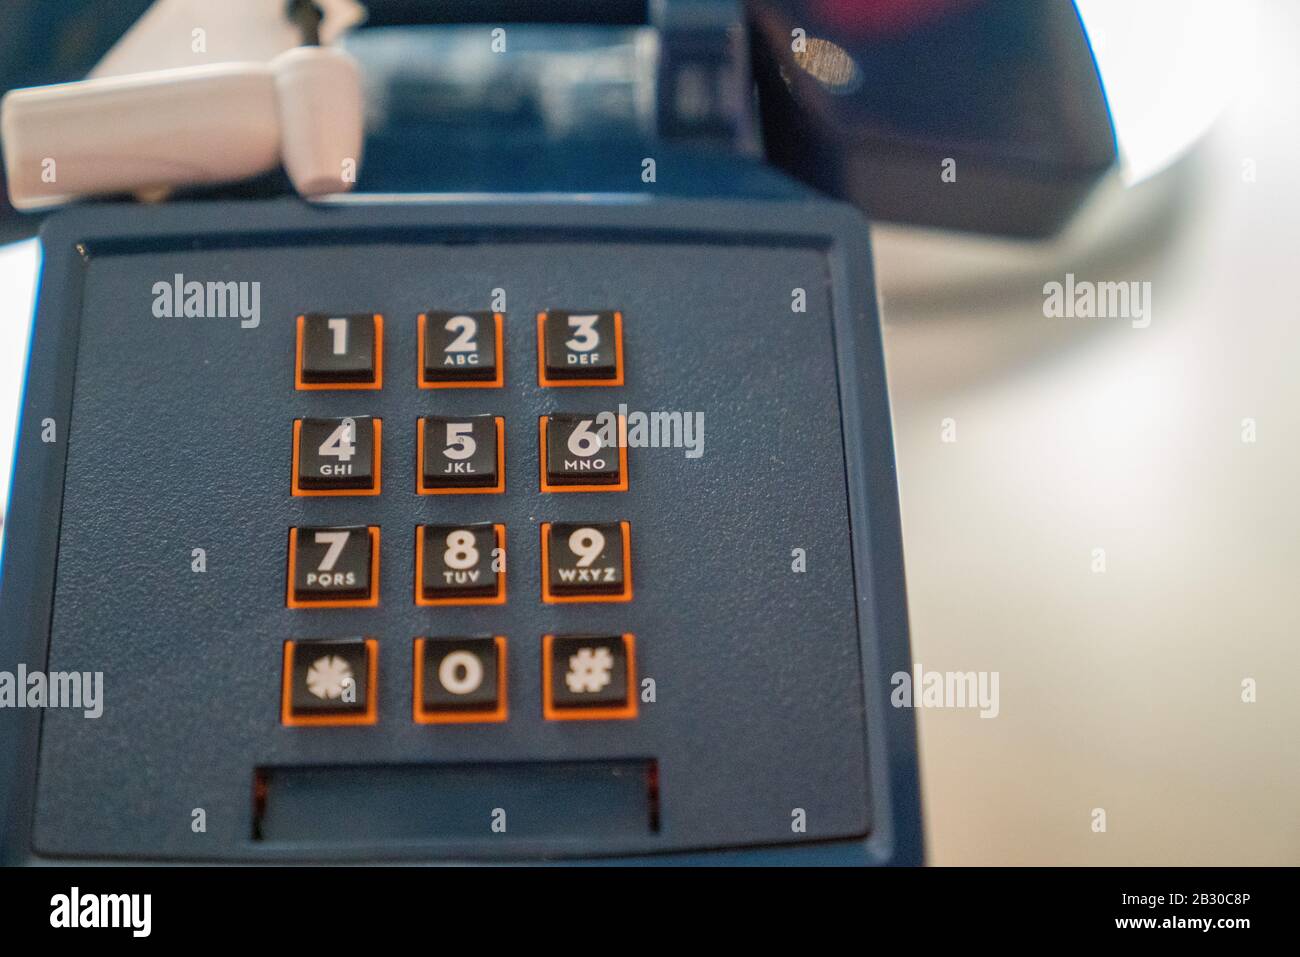 Touch pad of land line phone numbers and letters Stock Photo